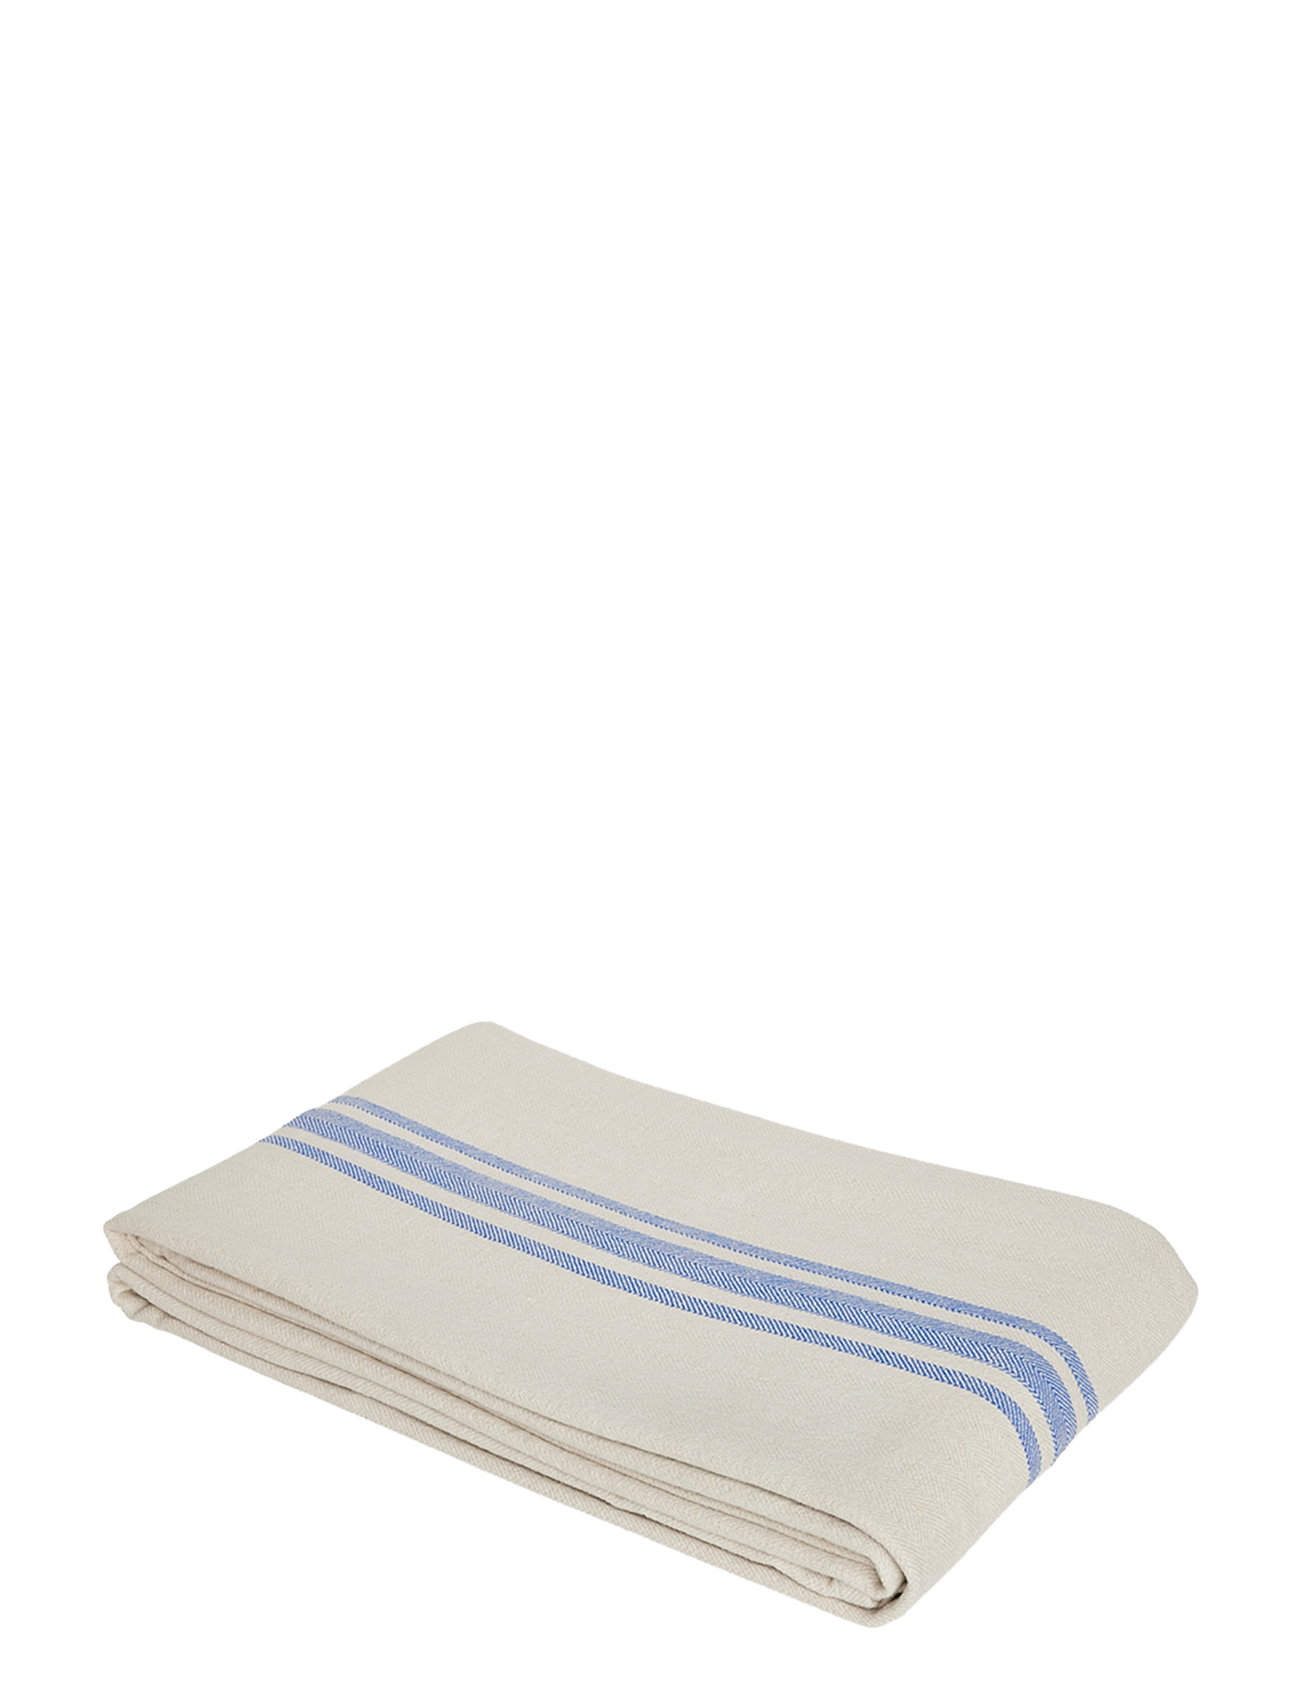 Linu Tablecloth - 260X140 Cm Home Textiles Kitchen Textiles Tablecloths & Table Runners Blue OYOY Living Design